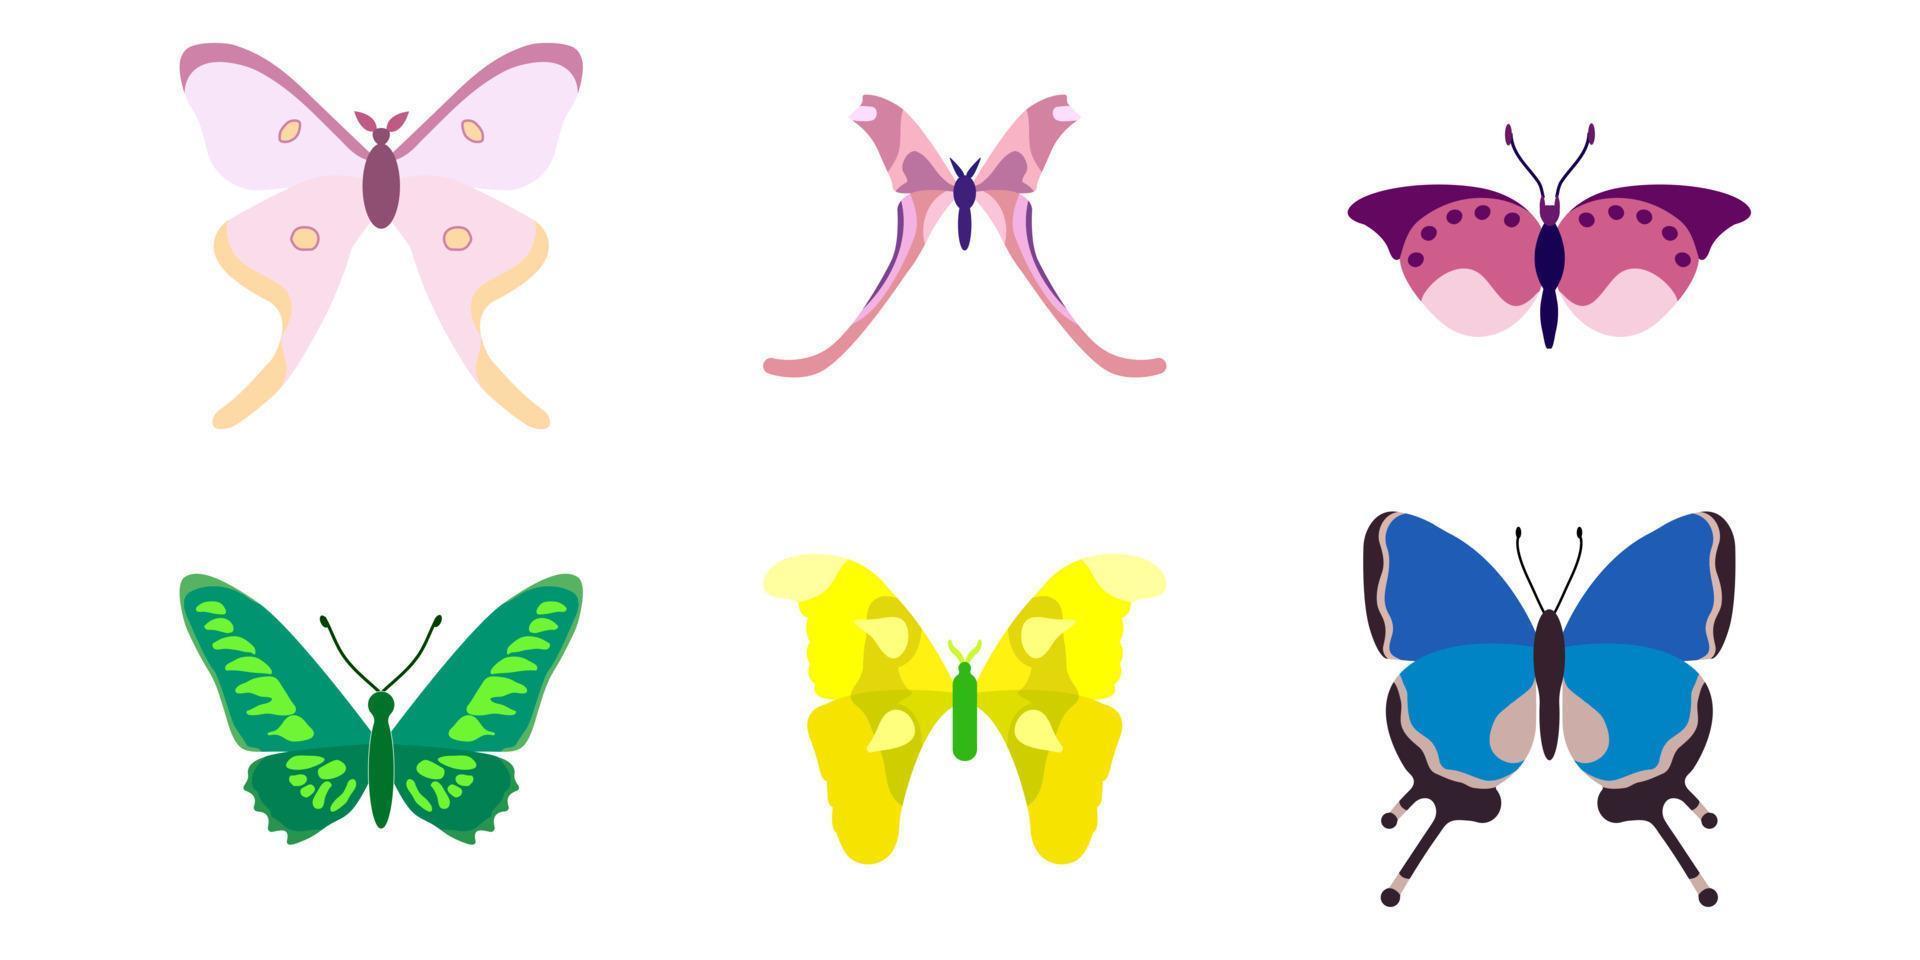 Set, collection of butterflies on a white background. Isolated cartoon icon set, decorative insect. vector